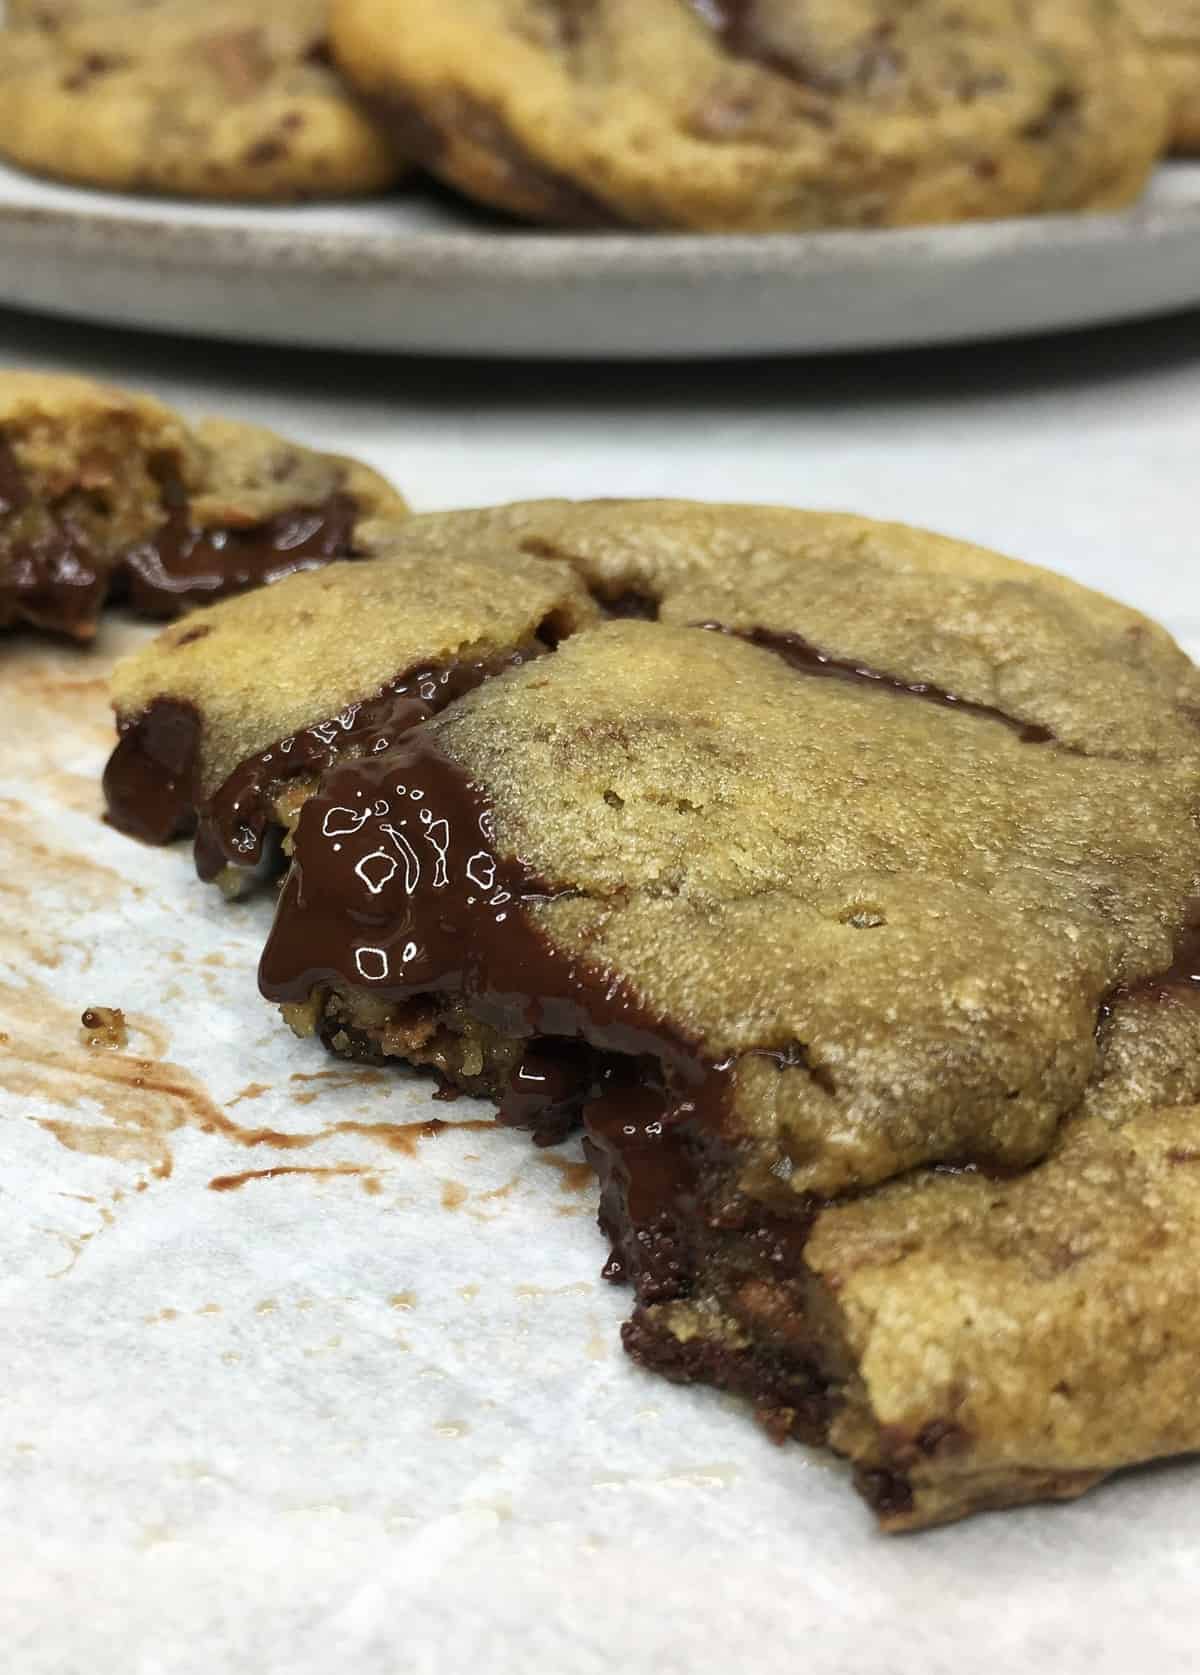 A piece of the chocolate cookie with the rest of the cookies on a plate